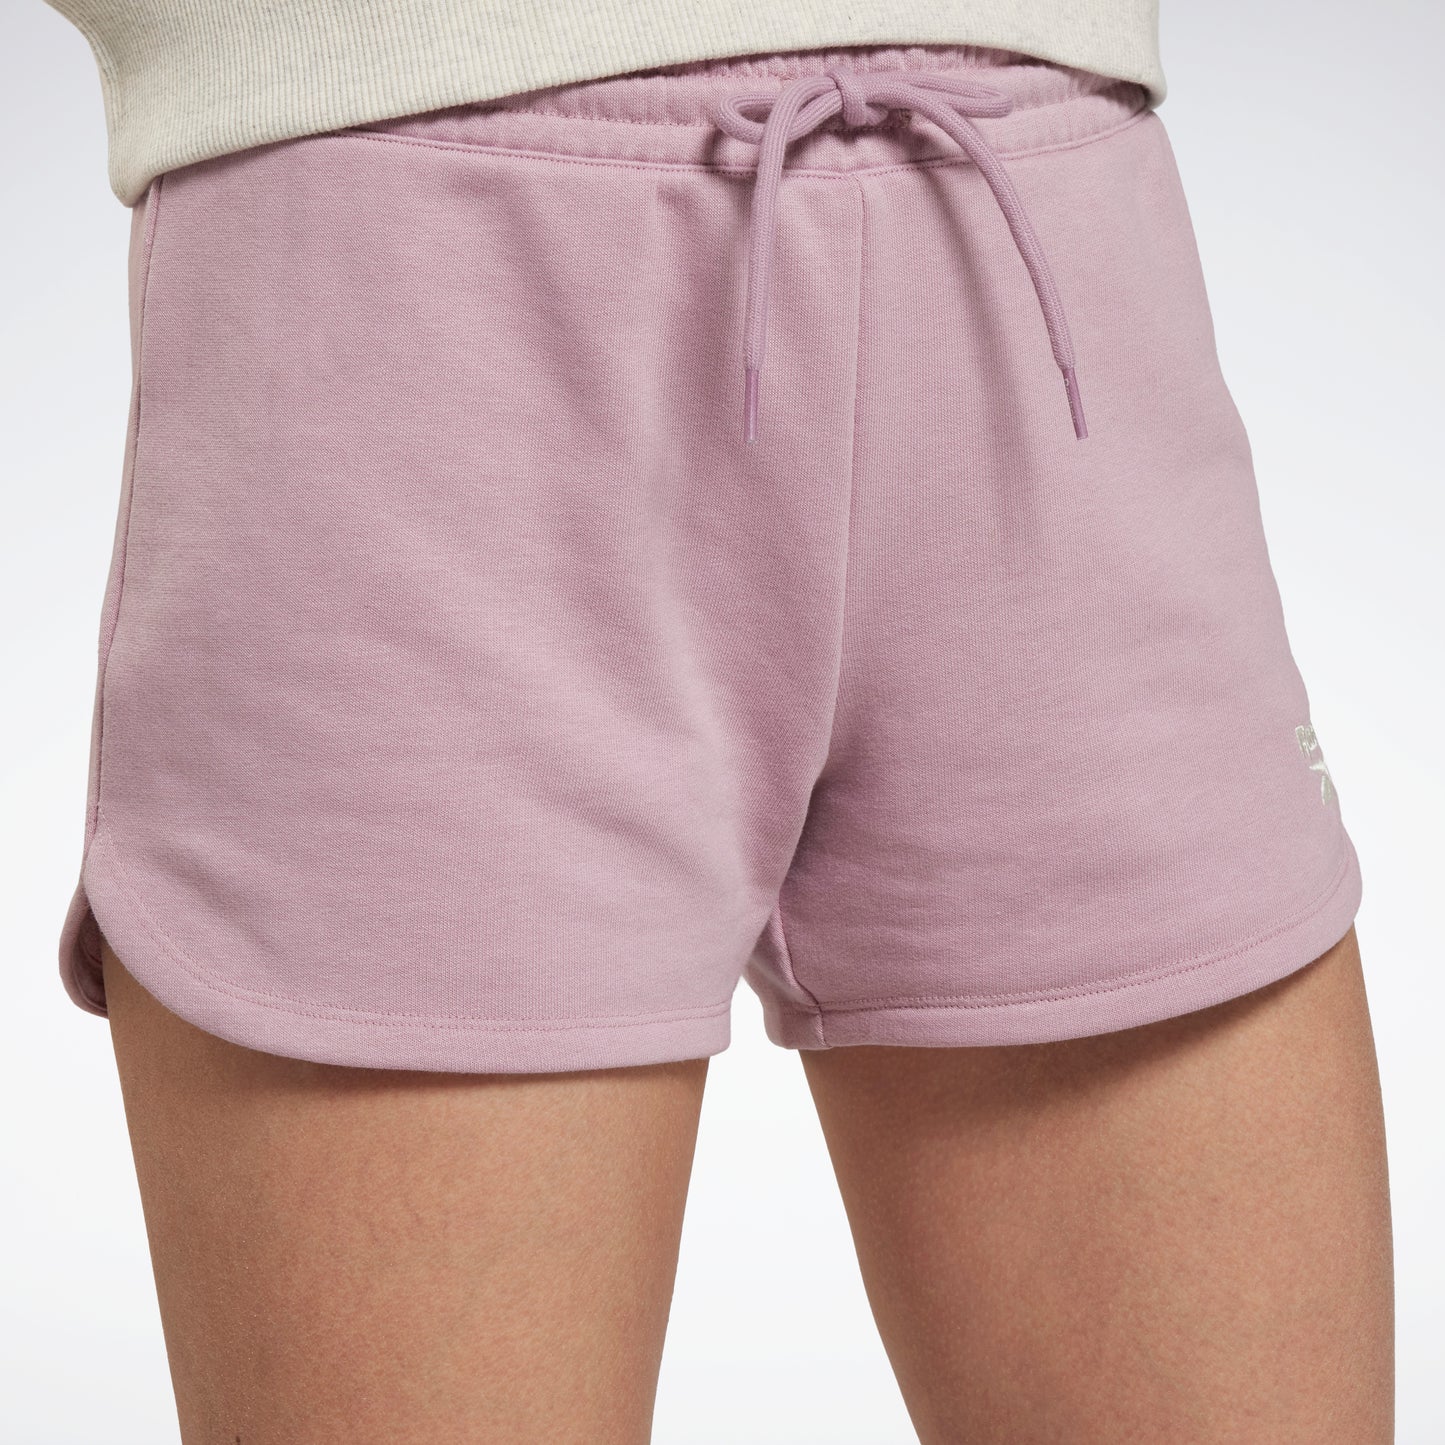 Reebok Identity French Terry Shorts Infused Lilac